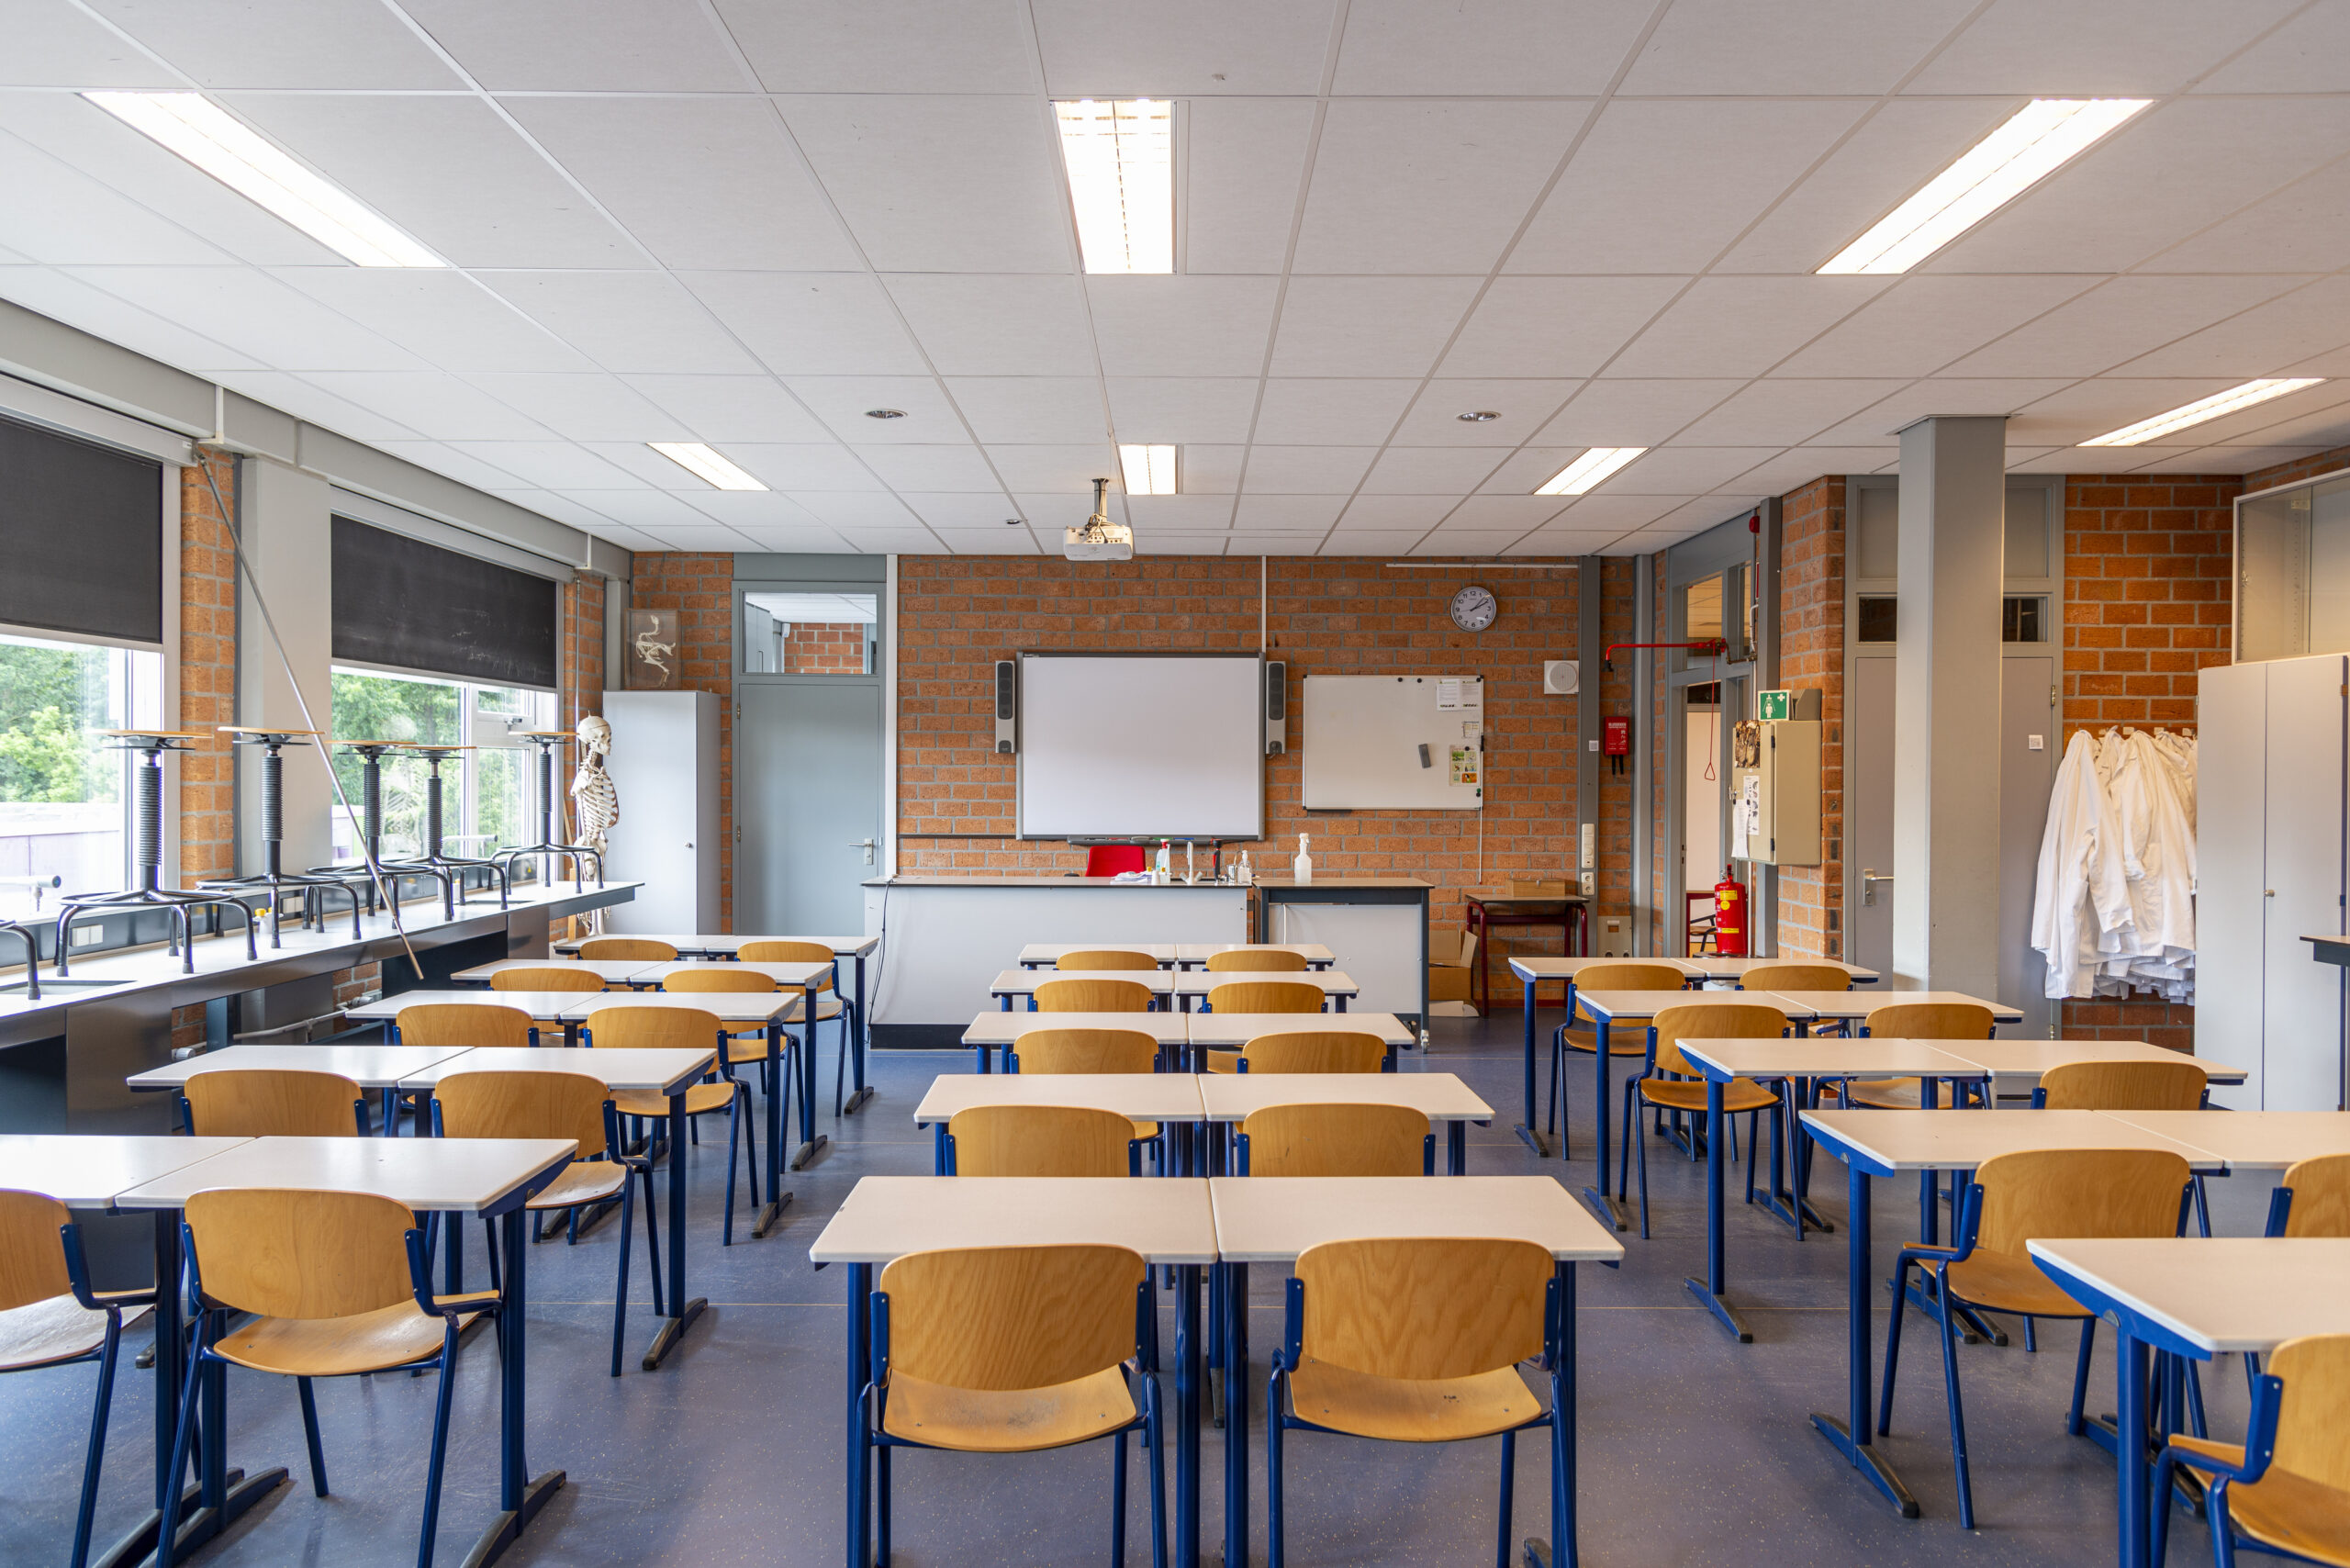 A photo looking at an empty classroom with tables and chairs in it.